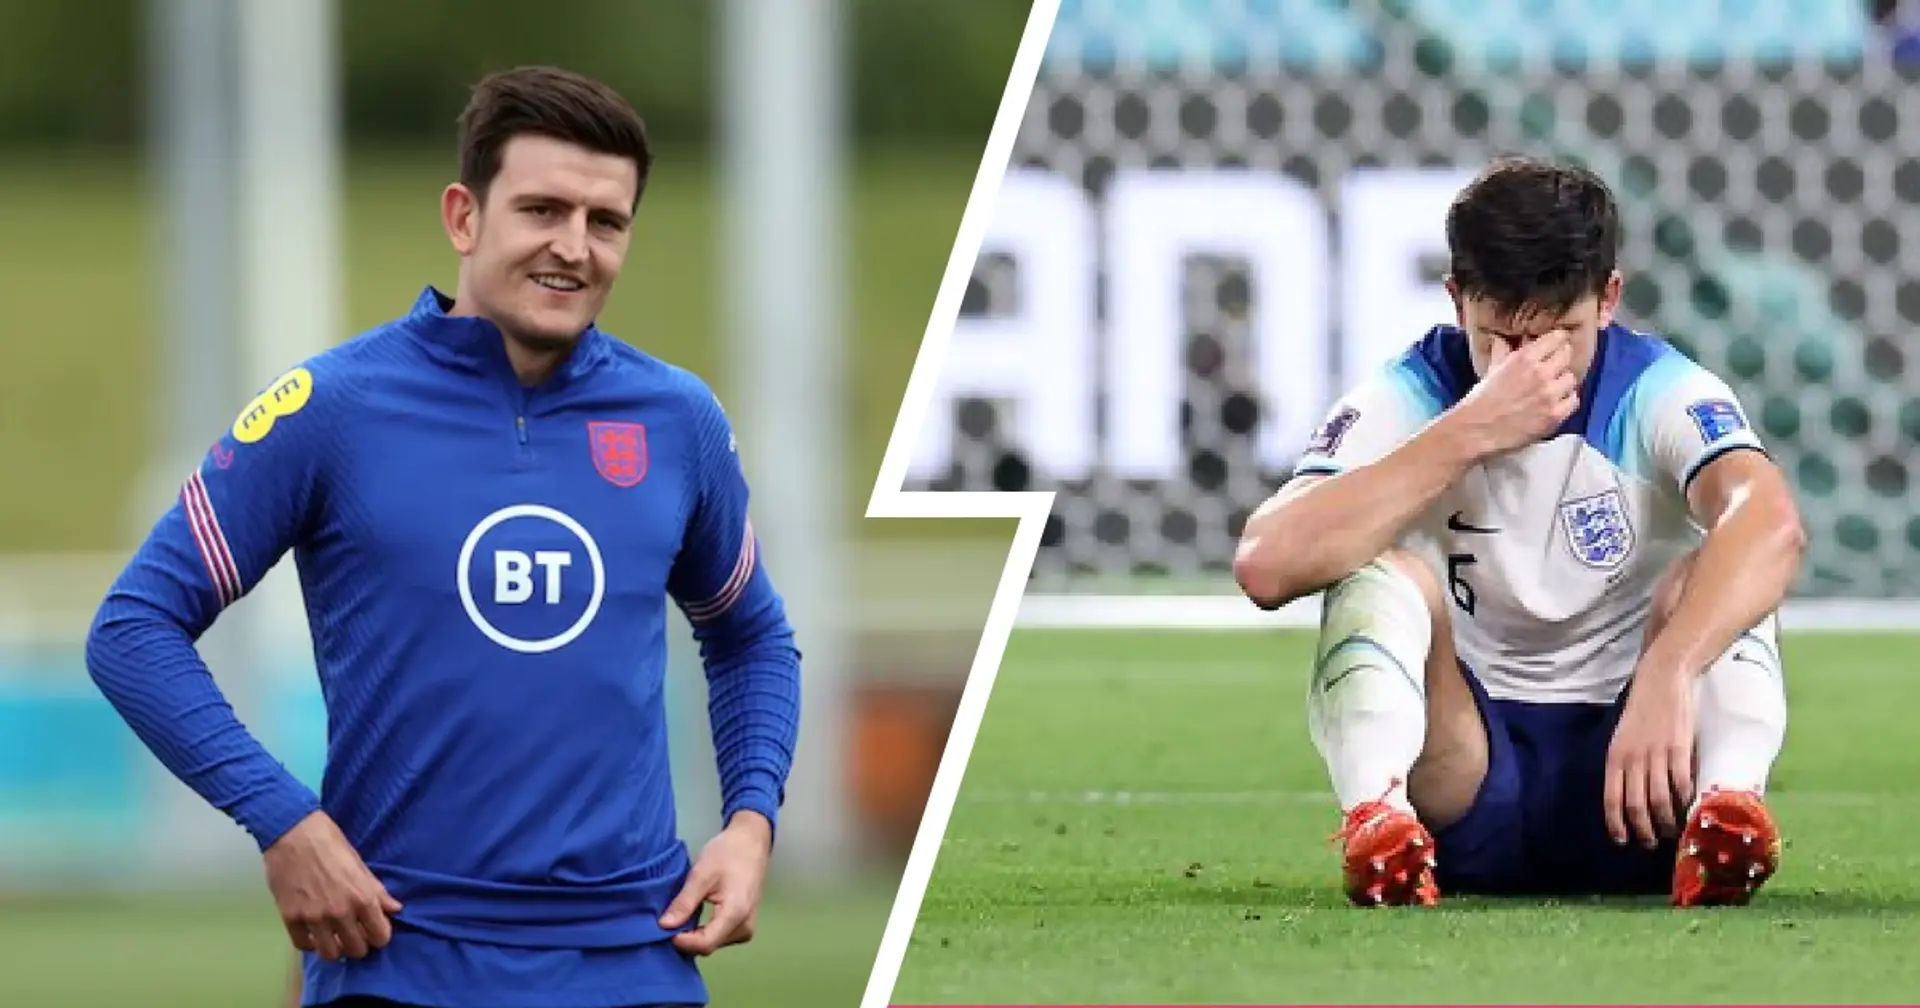 Maguire returns to England's training & 2 more under-radar stories at Man United